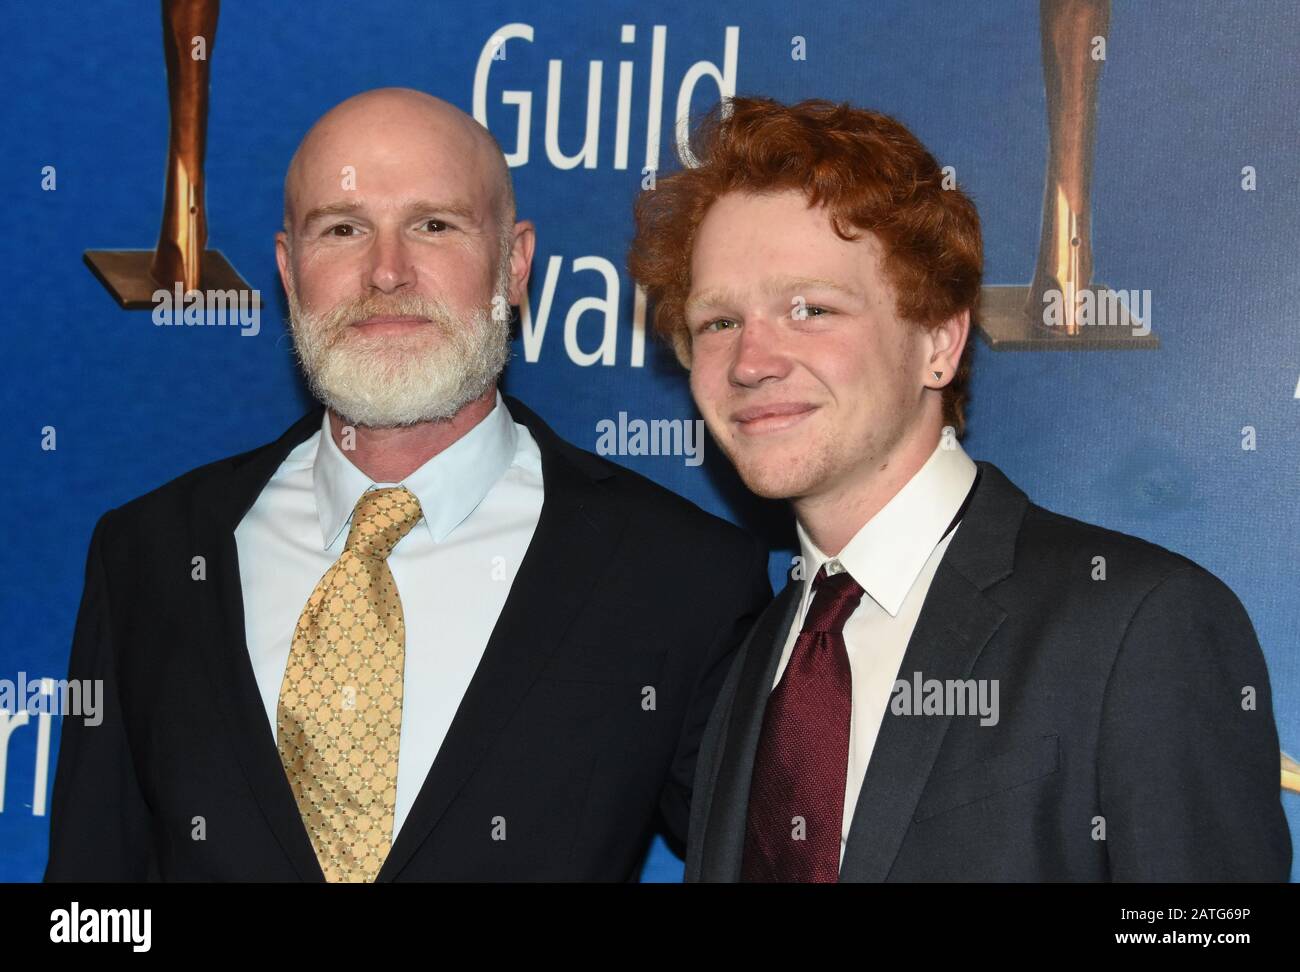 Beverly Hills, California, USA 1st February 2020 Writer David Hollander and actor Clay Hollander attend the 2020 Writers Guild Awards West Coast Ceremony on February 01, 2020 at The Beverly Hilton Hotel in Beverly Hills, California, USA. Photo by Barry King/Alamy Stock Photo Stock Photo